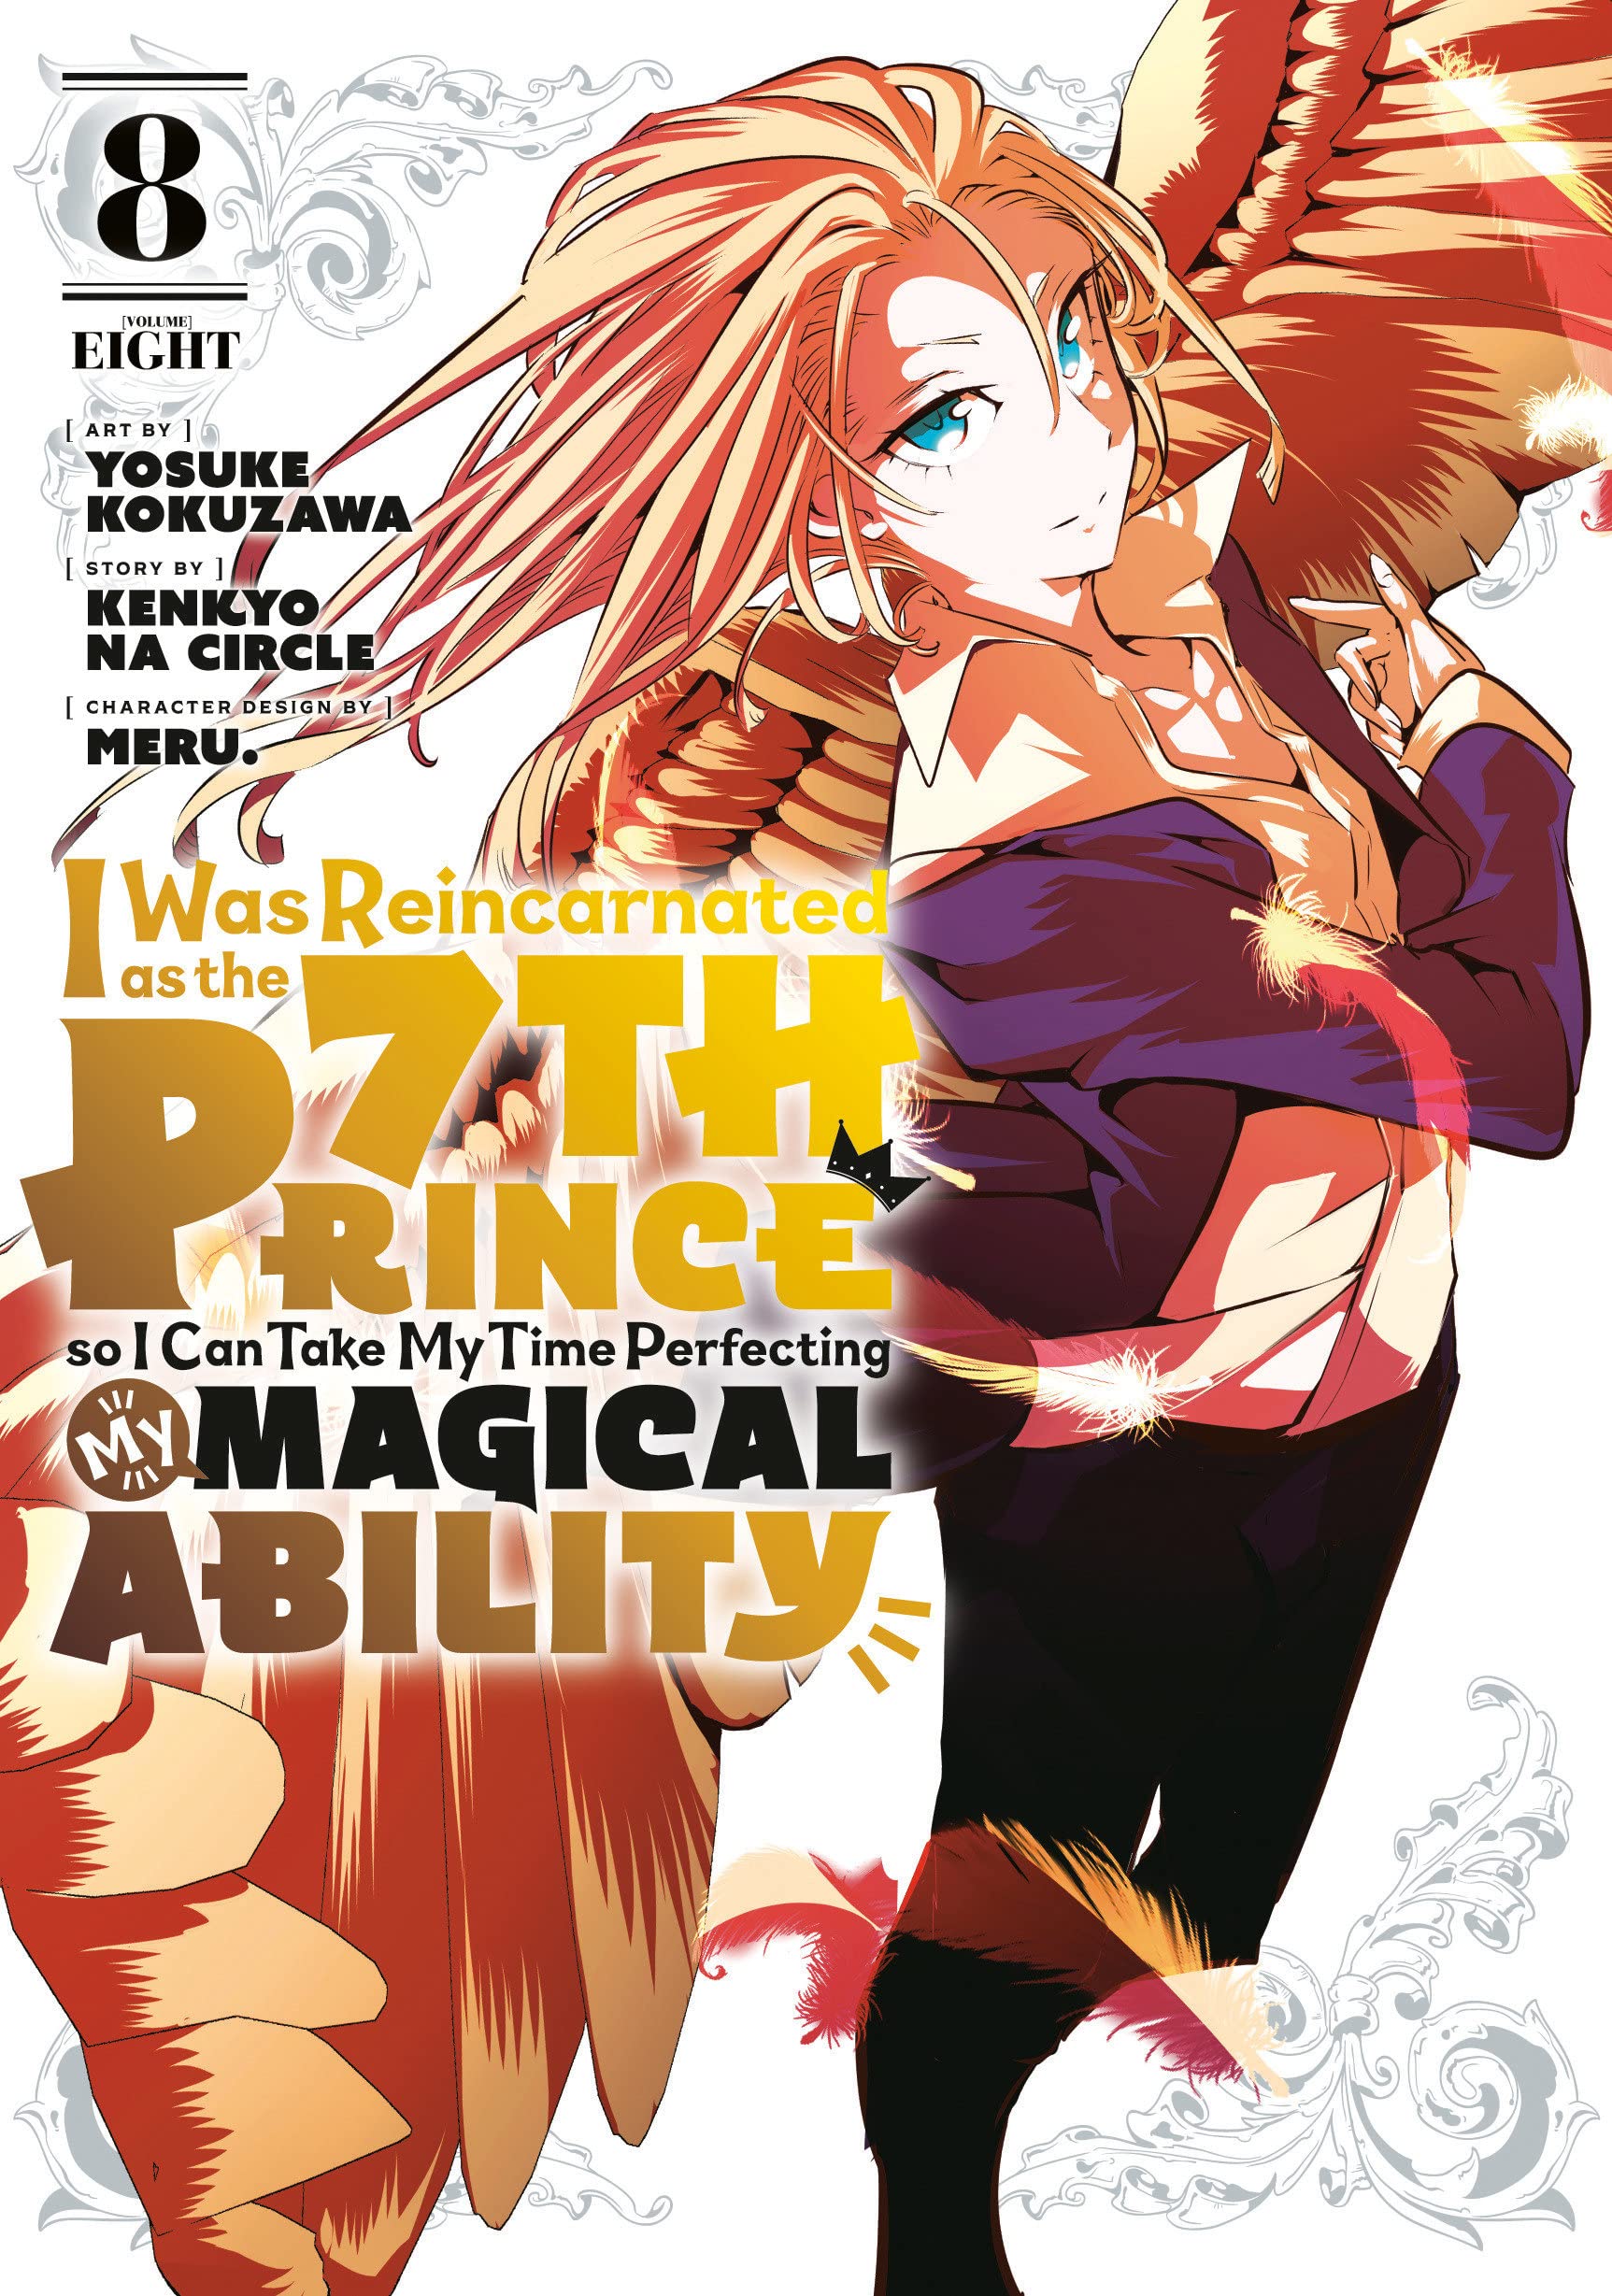 I Was Reincarnated as the 7th Prince so I Can Take My Time Perfecting My Magical Ability (Manga) Vol. 08